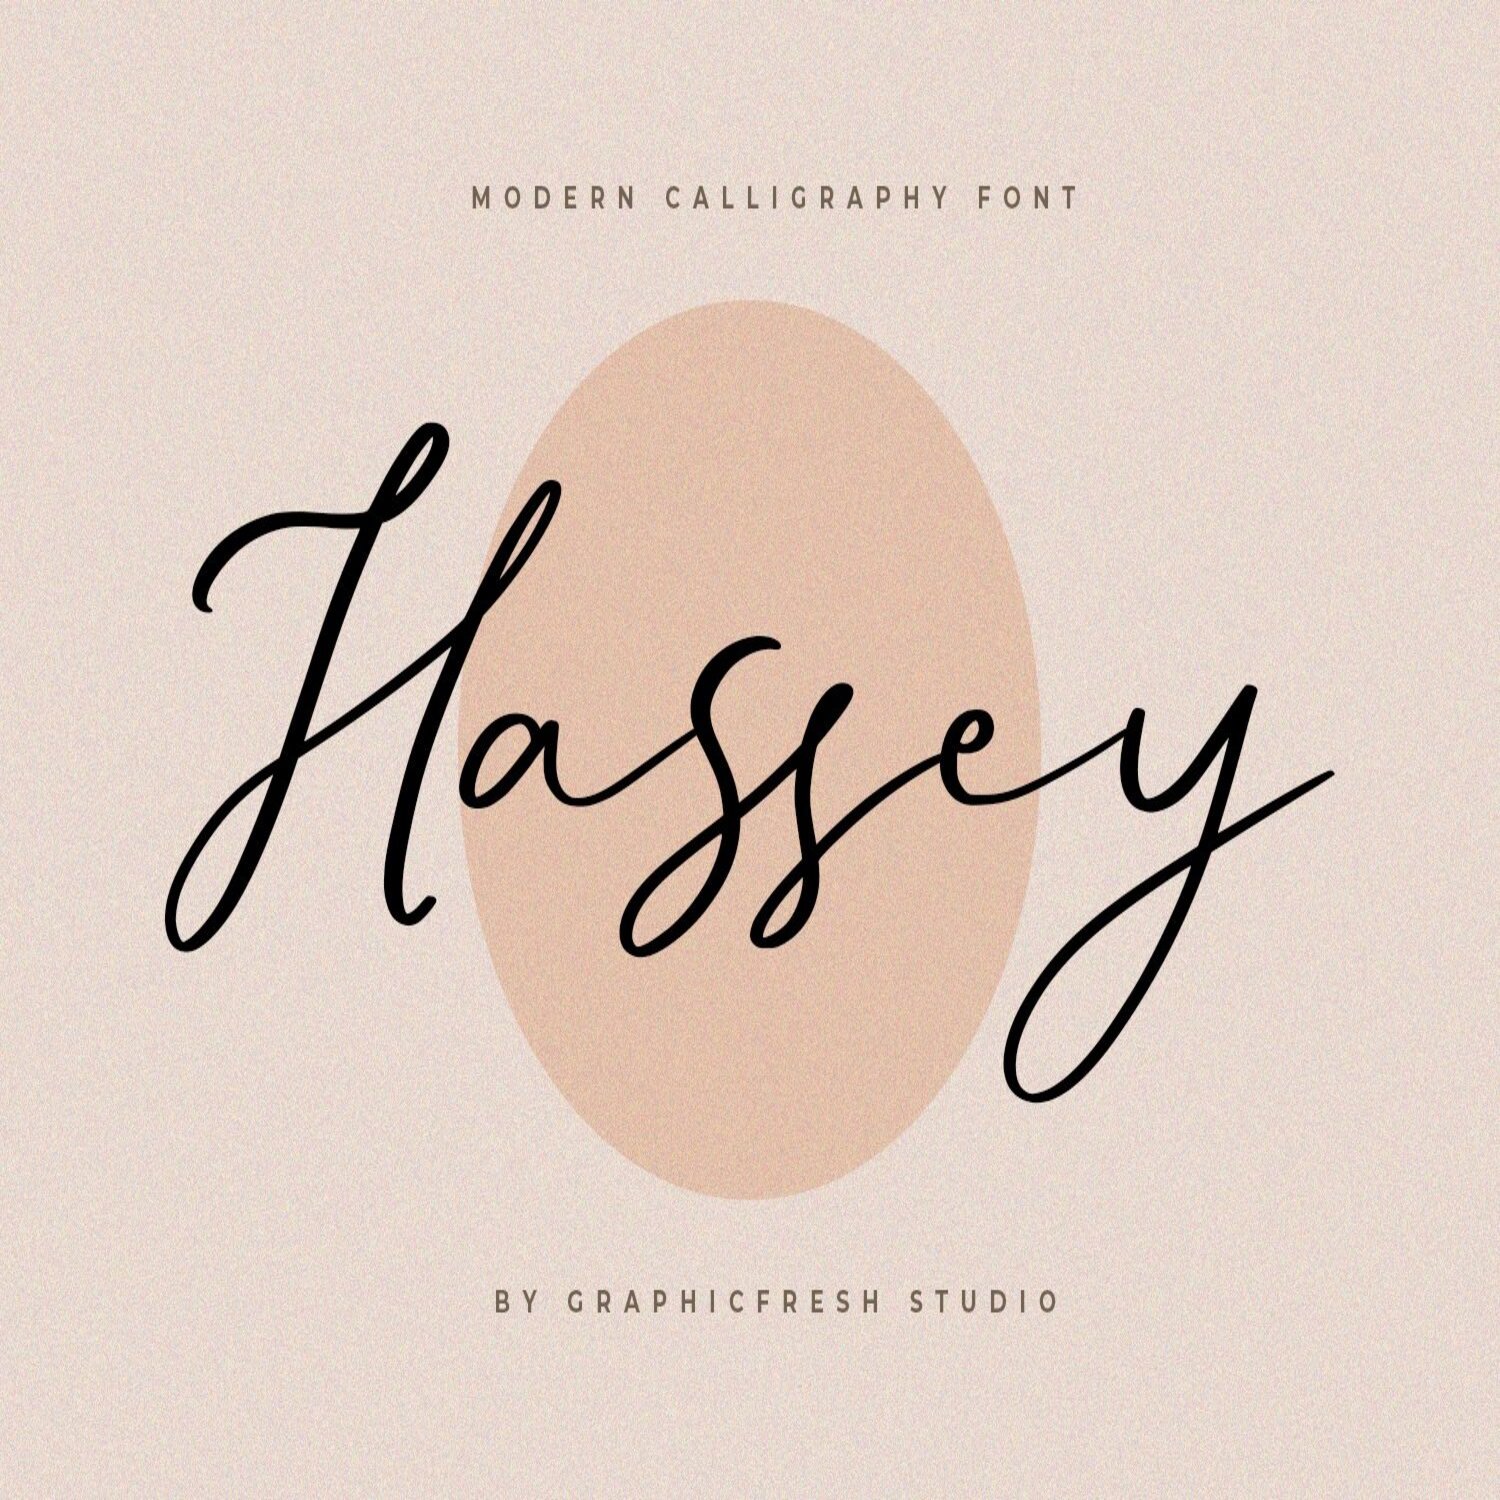 Hassey - A Modern Calligraphy Font main cover.